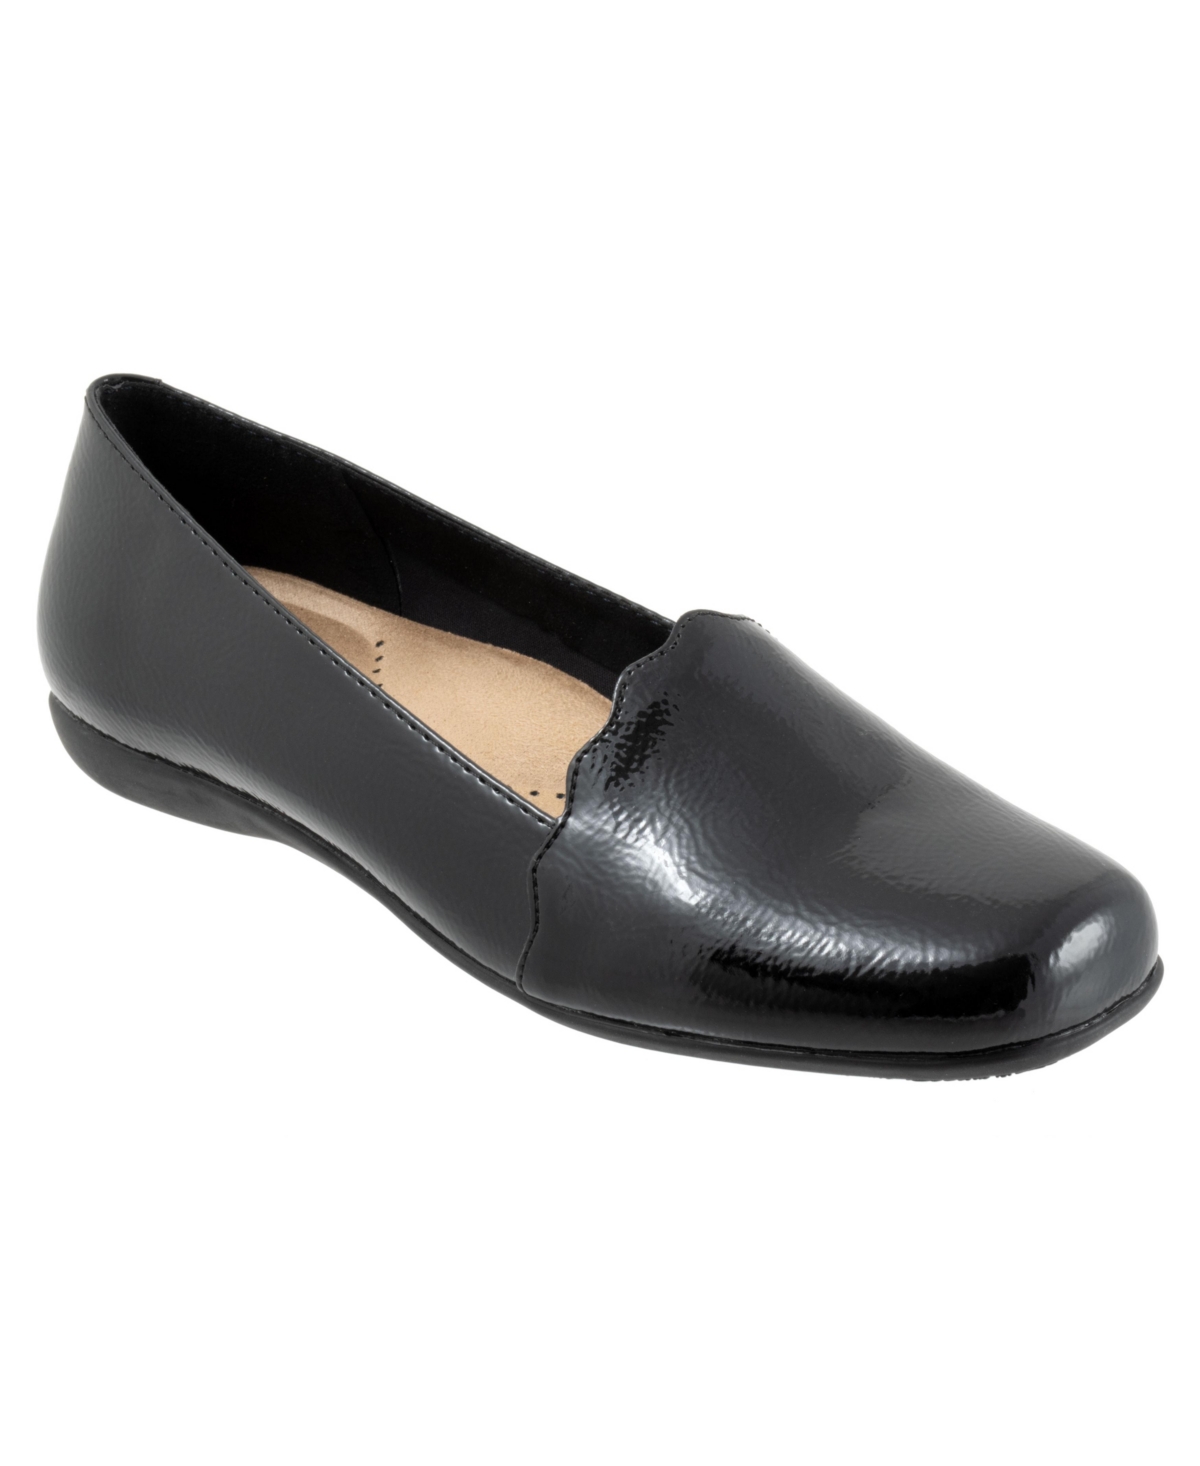 TROTTERS WOMEN'S SAGE LOAFERS